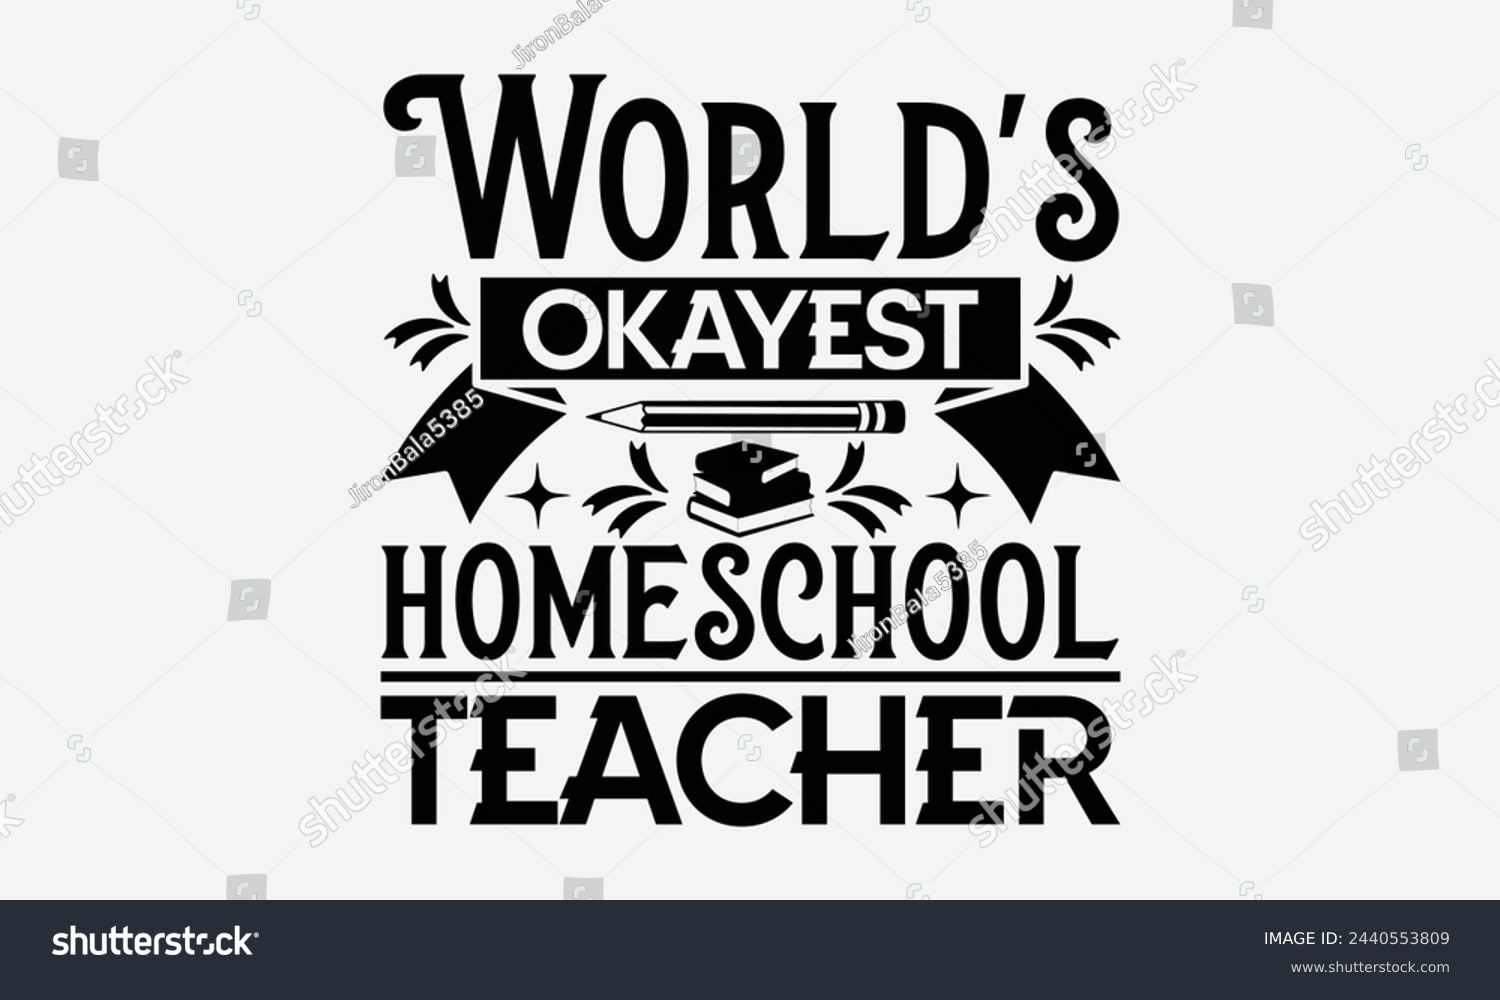 SVG of World's okayest homeschool teacher - Mom t-shirt design, isolated on white background, this illustration can be used as a print on t-shirts and bags, cover book, template, stationary or as a poster. svg